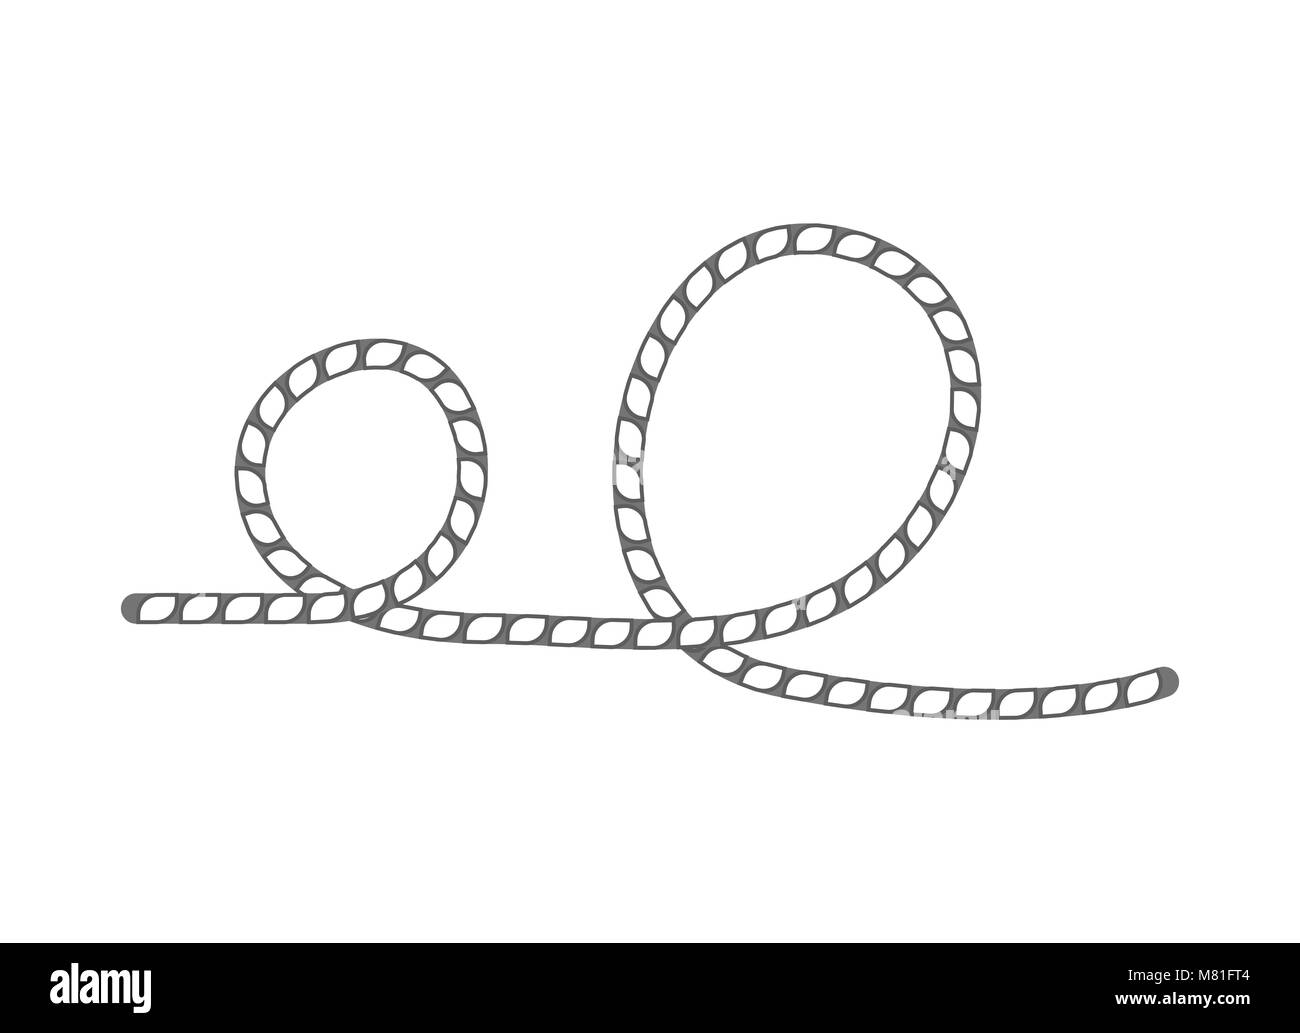 Lasso rope isolated vector icon Stock Vector